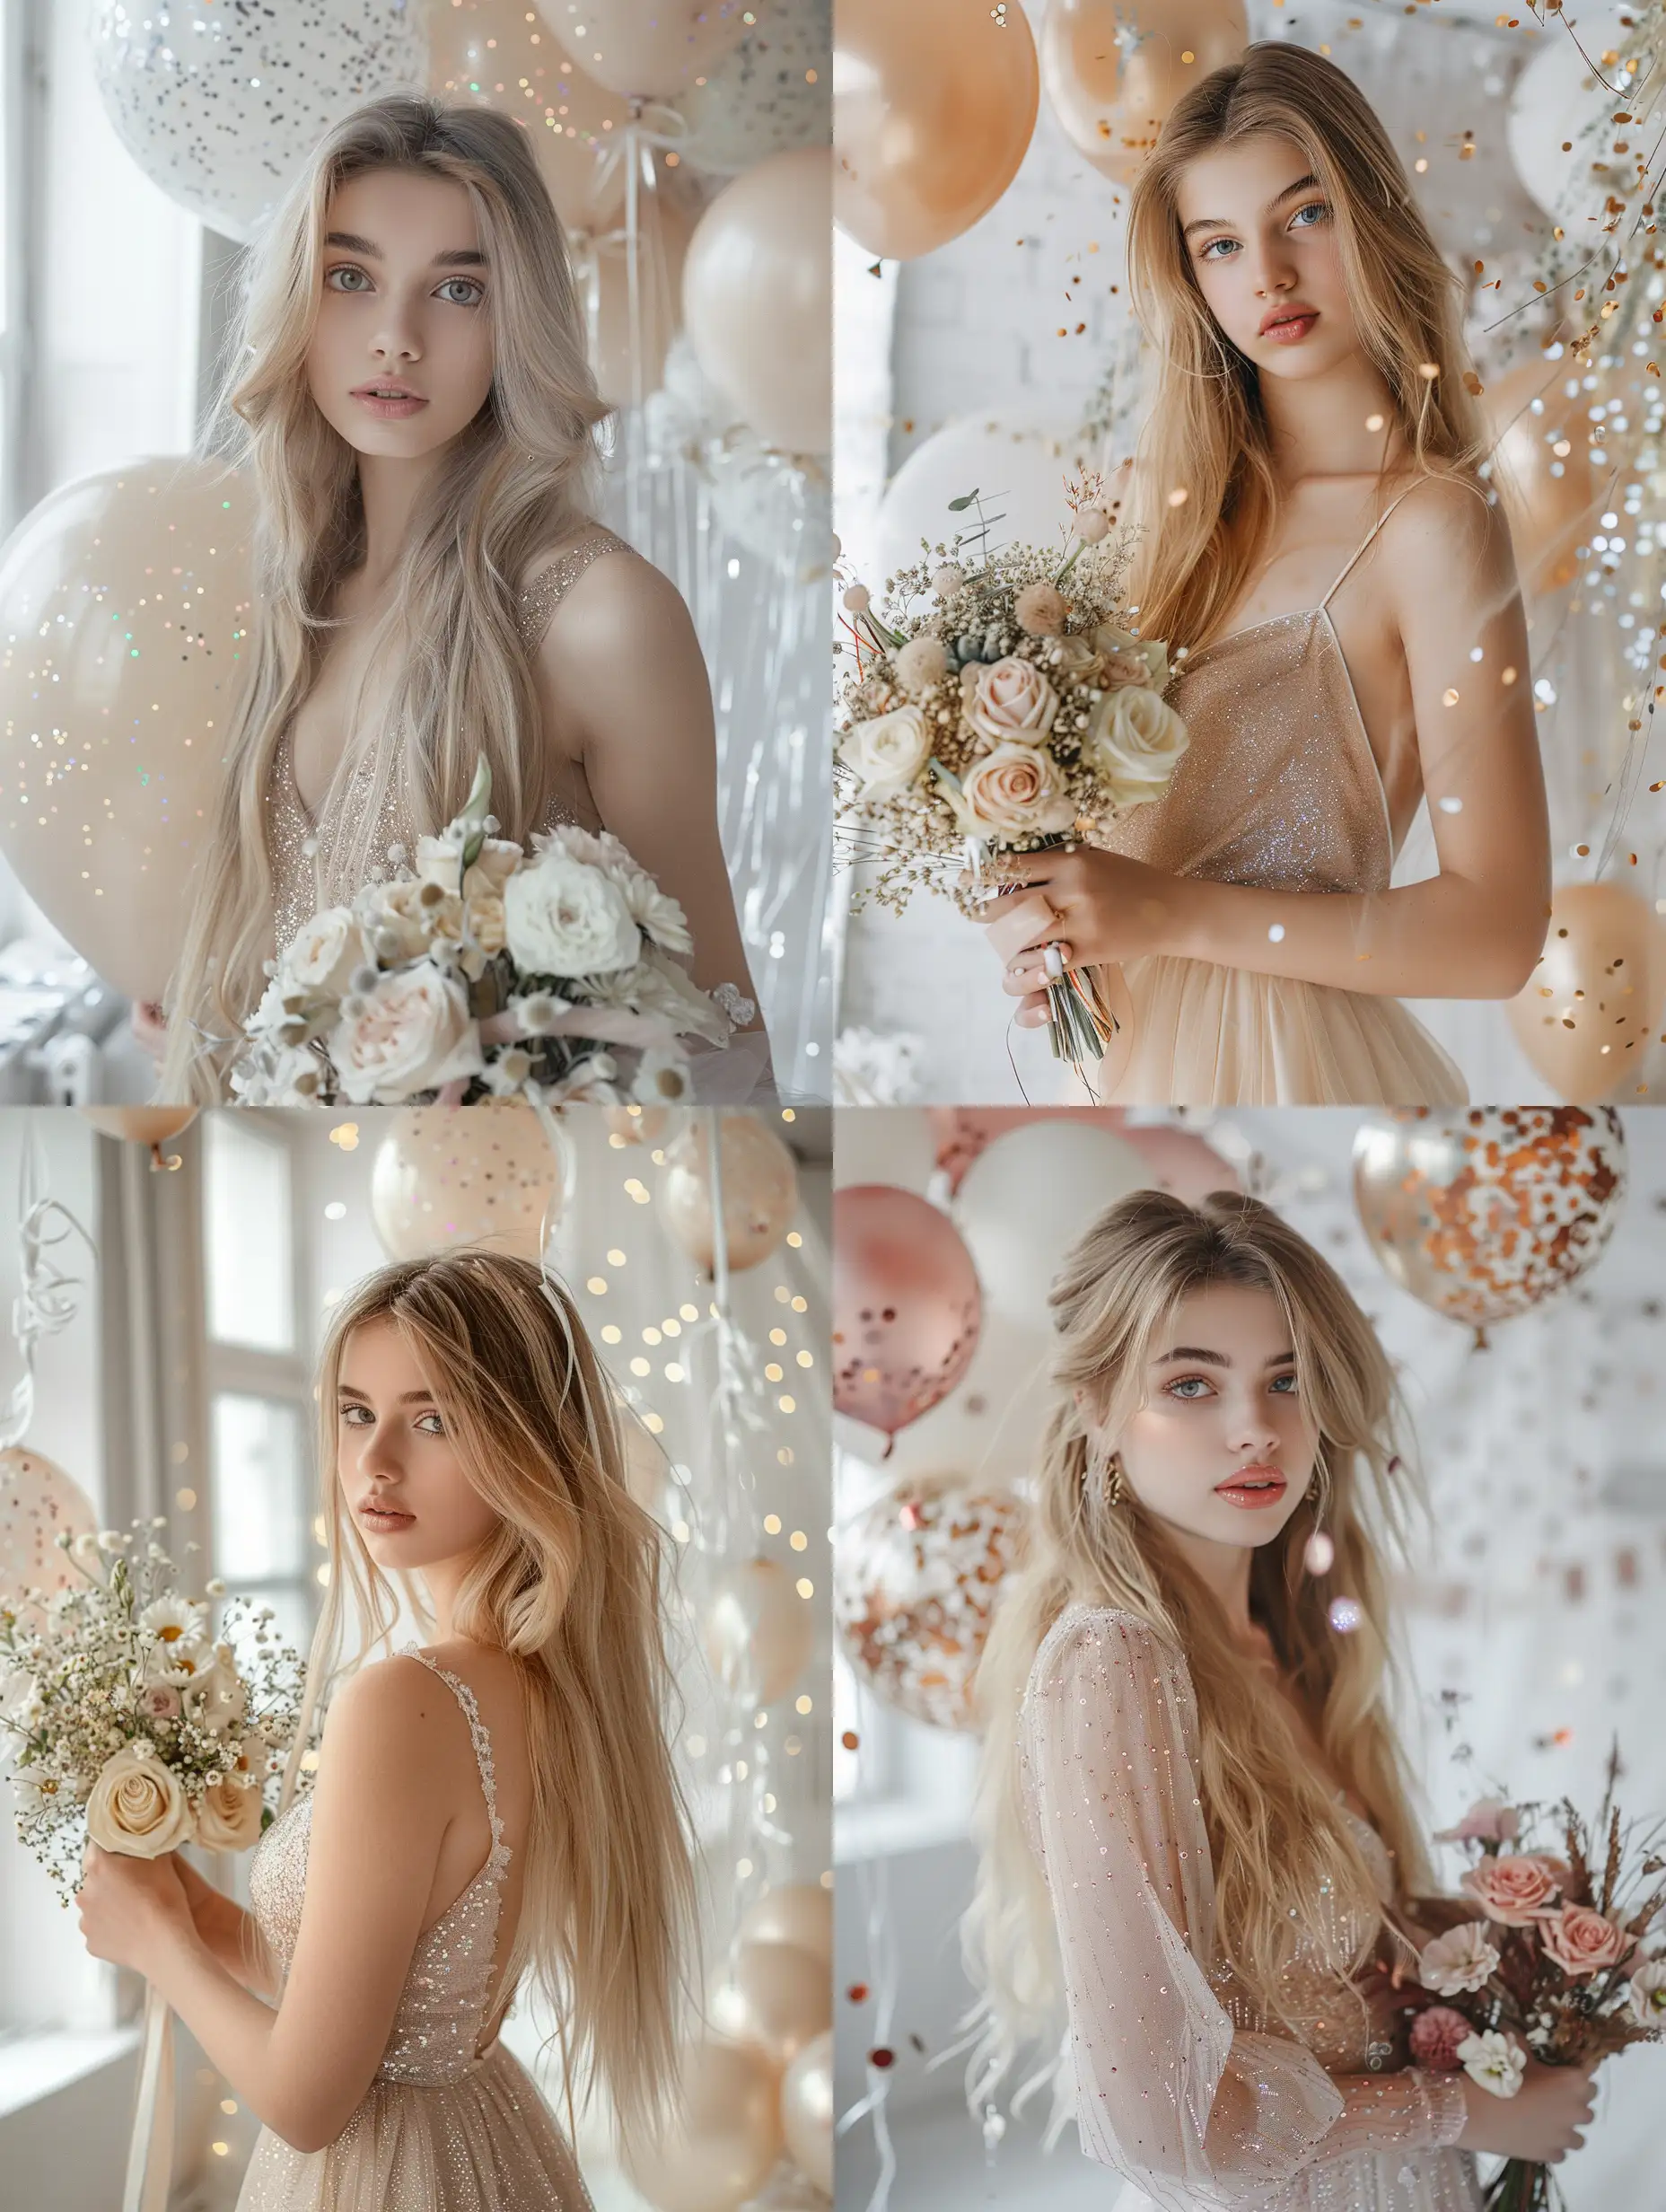 Elegant-Blonde-Woman-Holding-a-Floral-Bouquet-in-Glittering-Studio-Setting